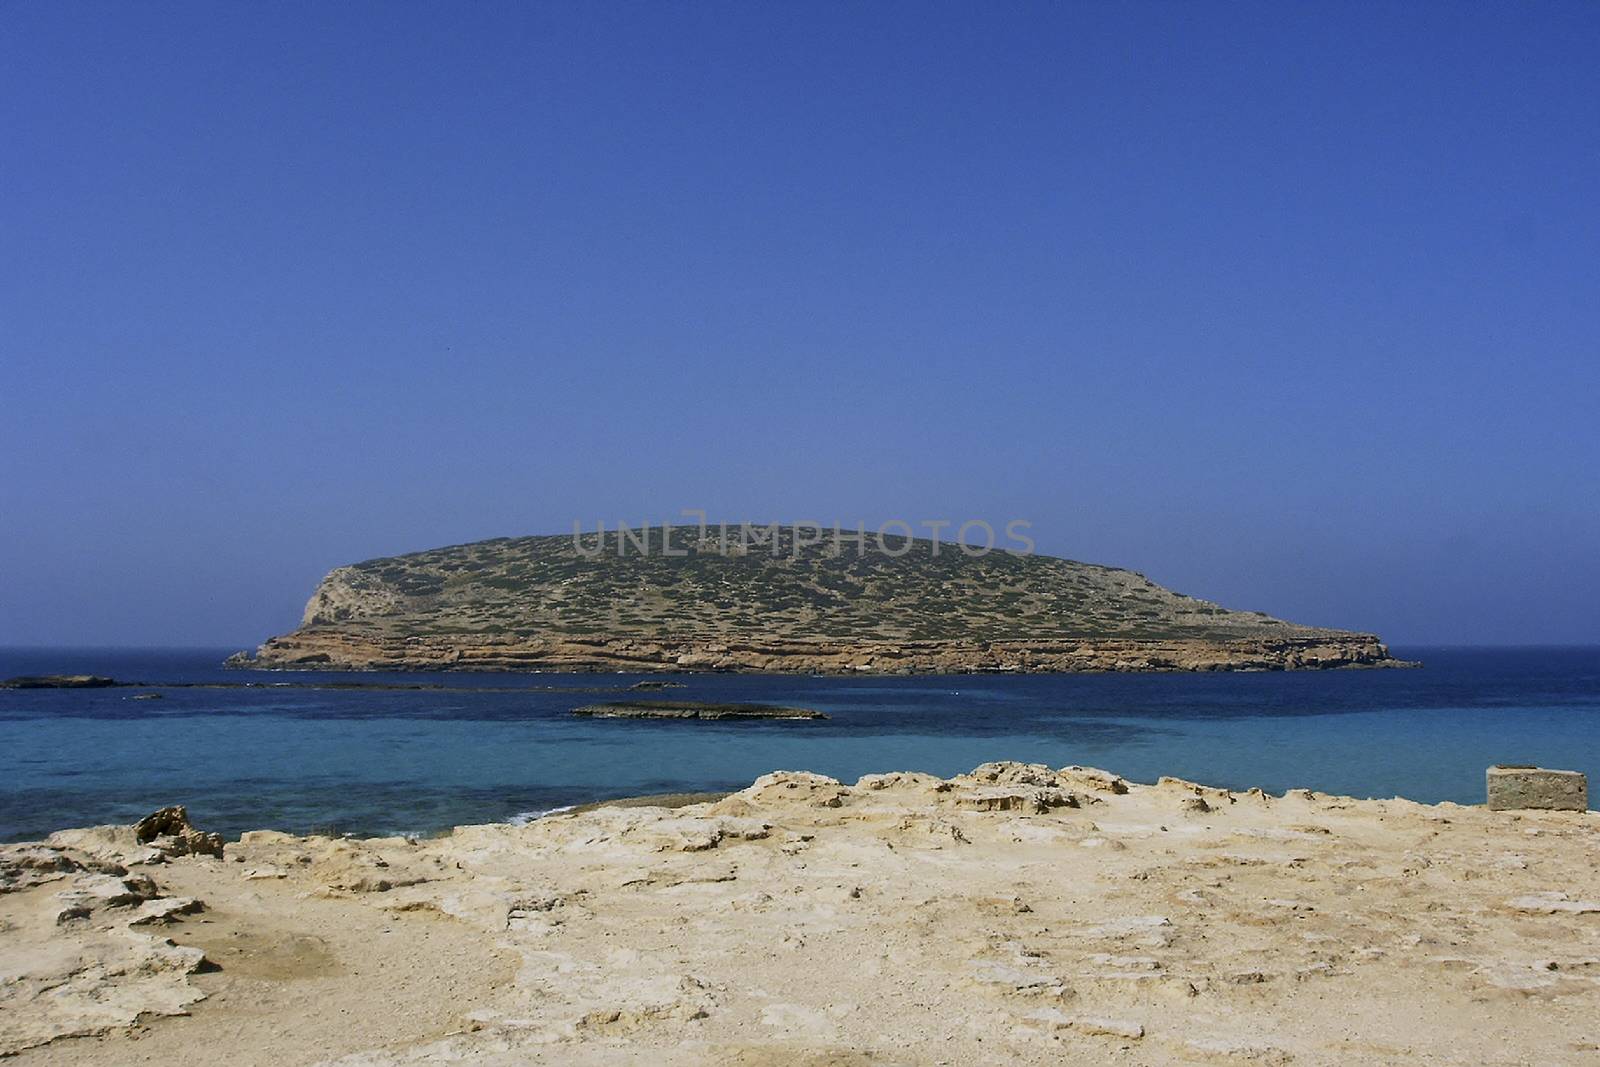 Deserted beach with turquoise waters, bright day, Mountains in the background and bright blue day, with a large rock in the middle